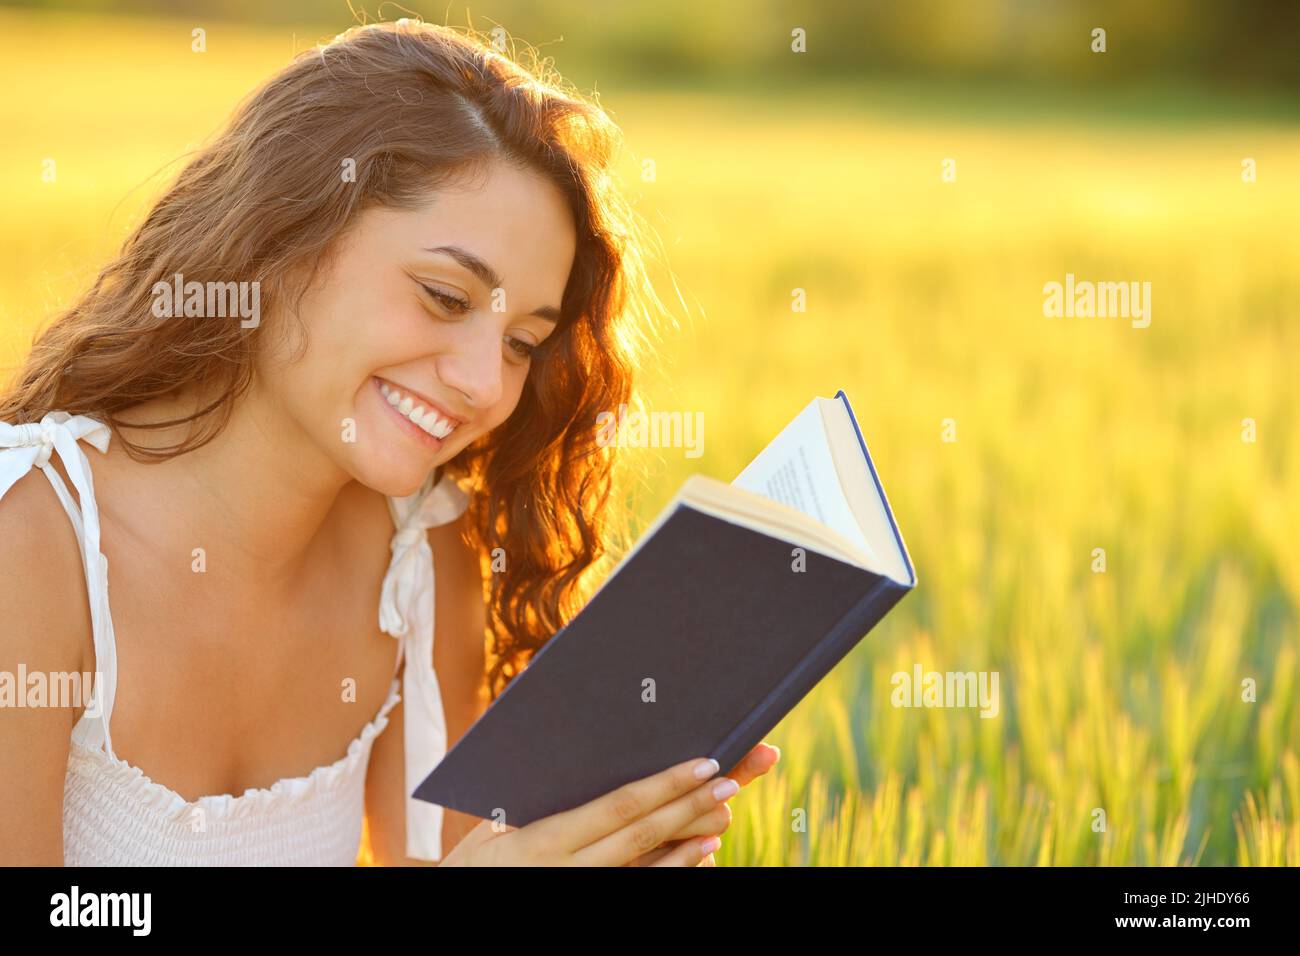 Happy woman reading a book smiling in a wheat field at sunset Stock Photo